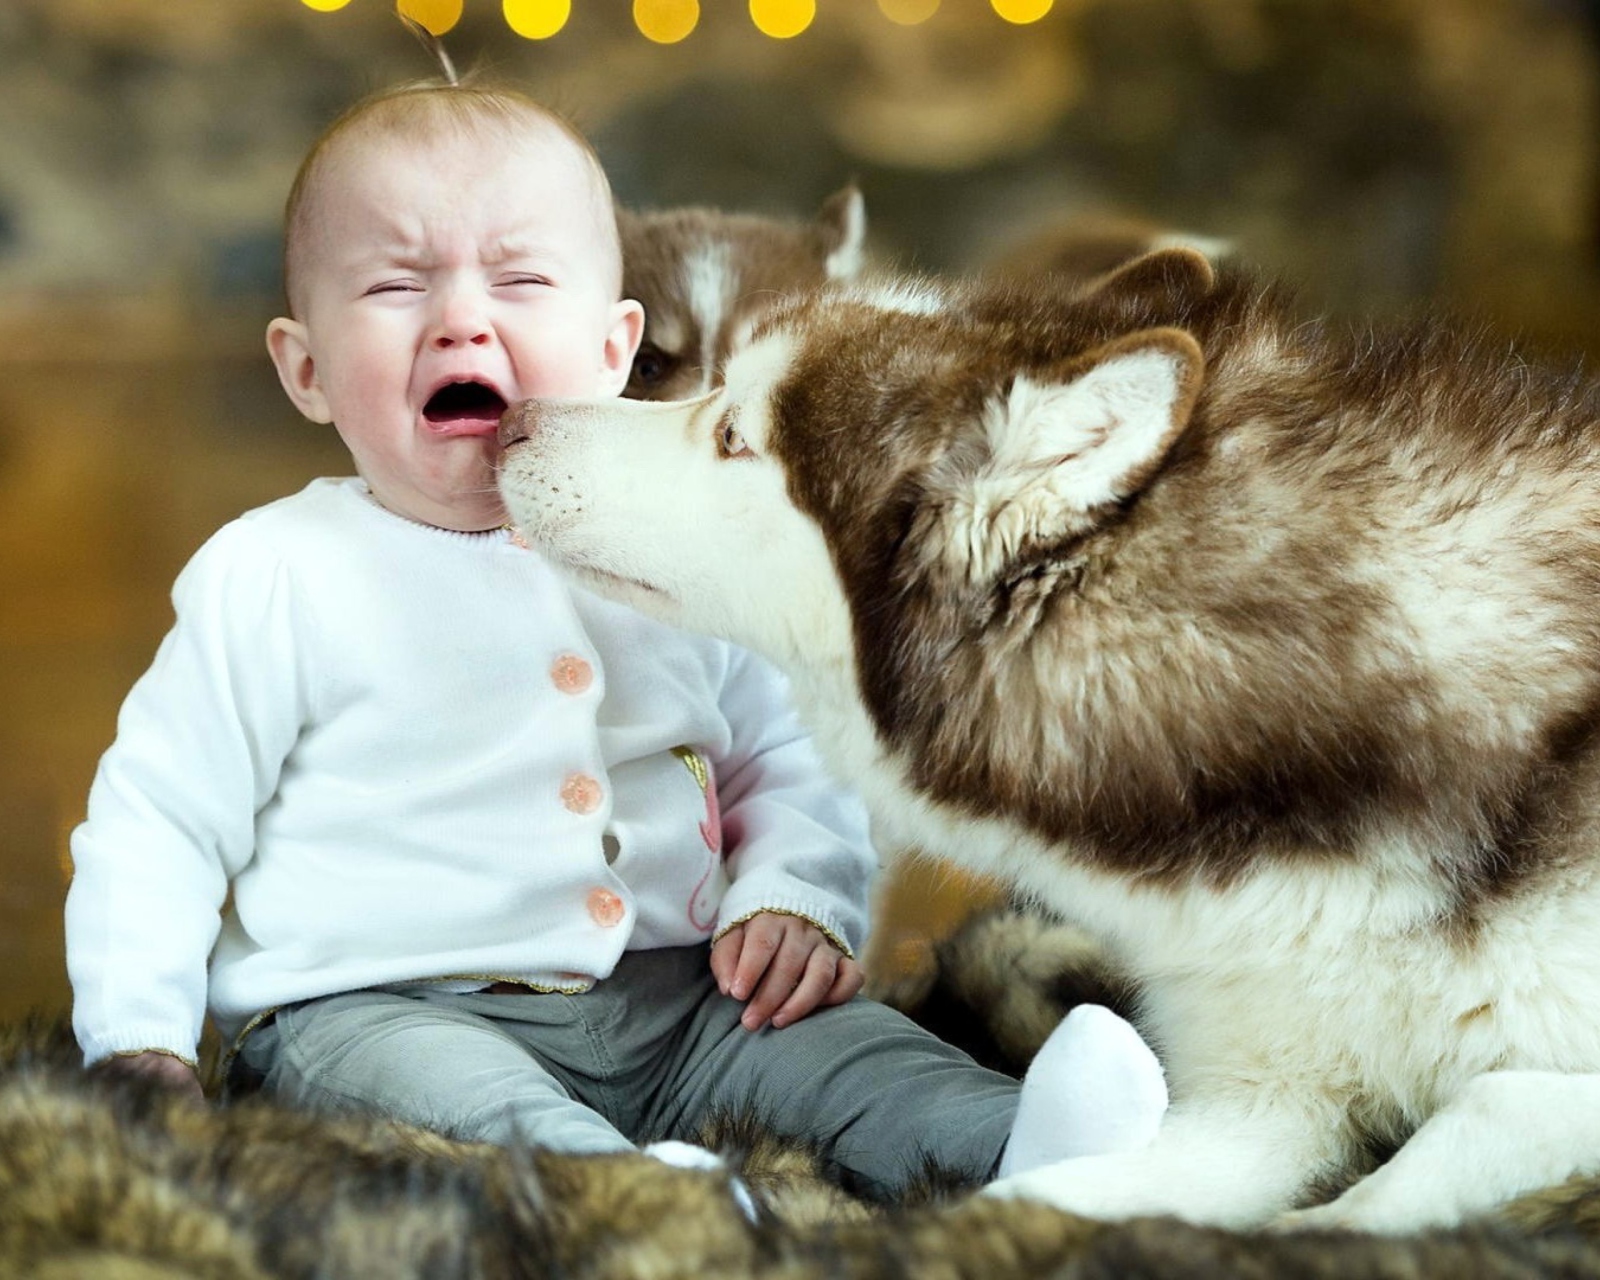 Baby and Dog wallpaper 1600x1280